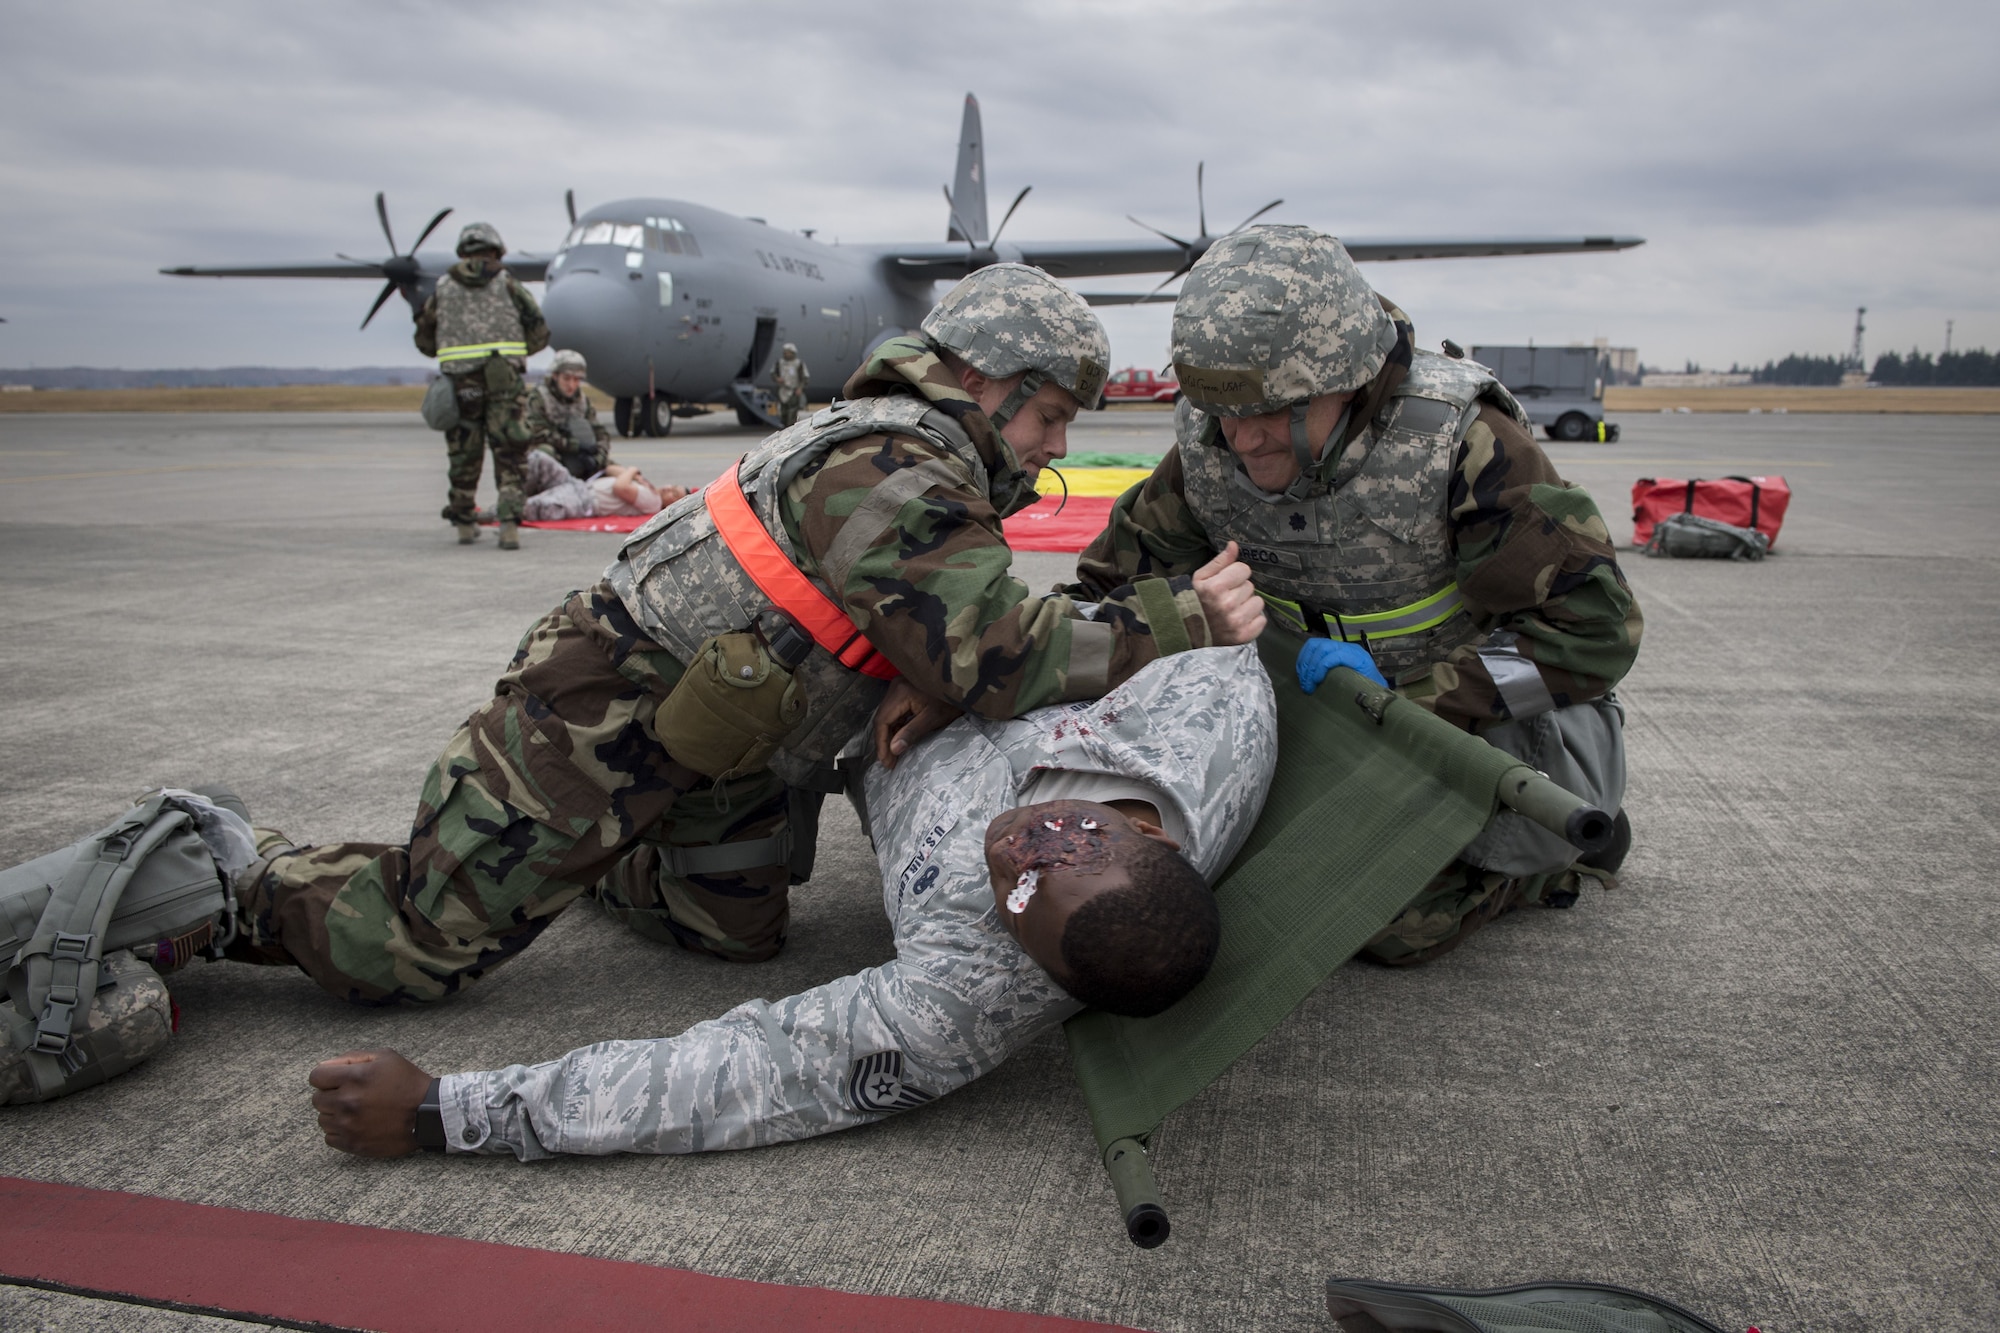 A 374th Medical Squadron medic and on scene doctor work together to place a simulated victim on a stretcher during exercise Beverly Morning 17-08 in conjunction with exercise Vigilant Ace 18, Dec. 4, 2017, at Yokota Air Base, Japan.